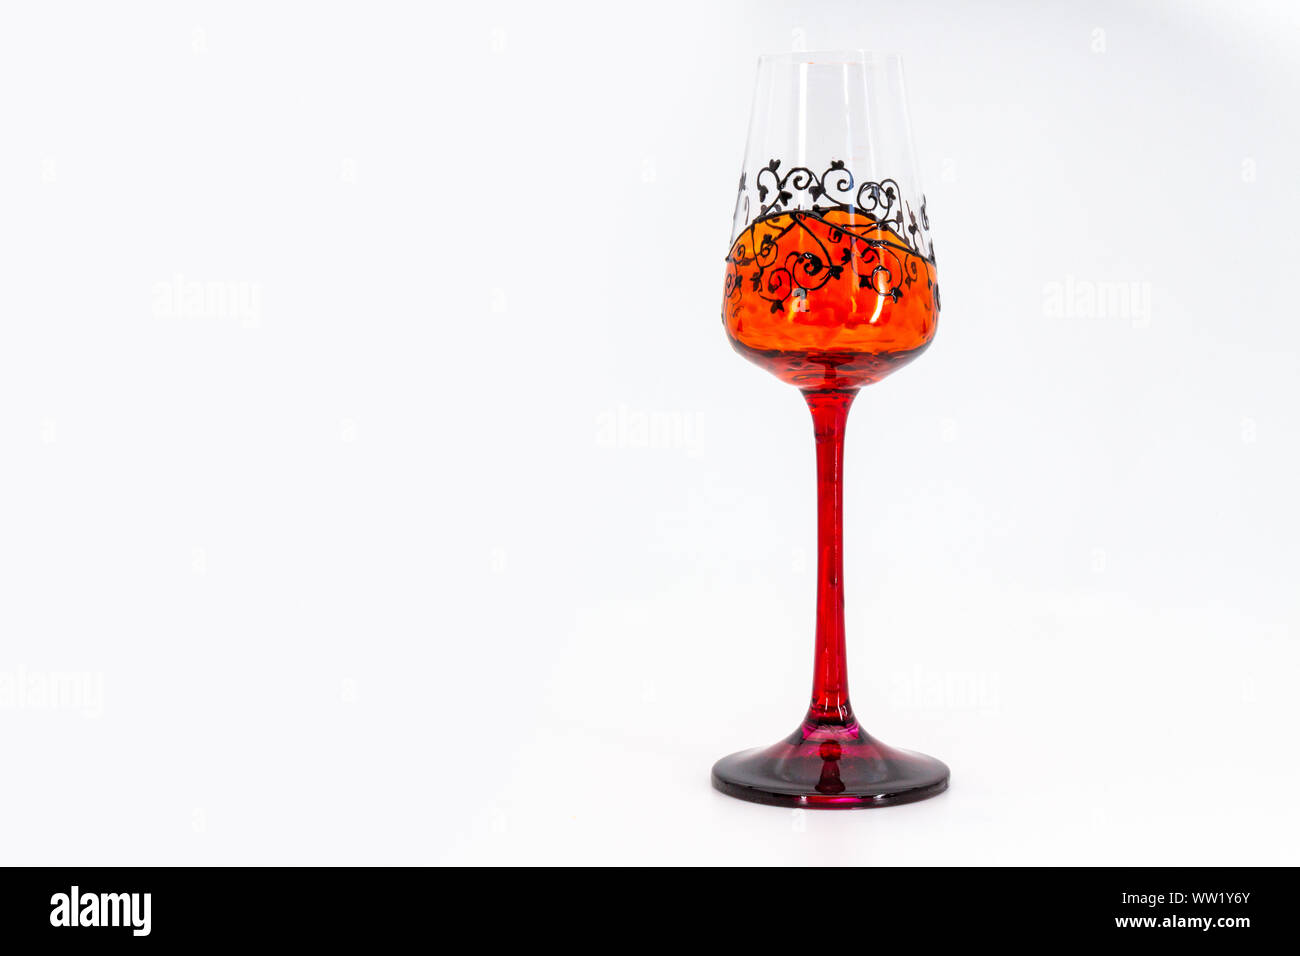 Painted unique ornamented ornate orange grappa glass with copy space Stock Photo